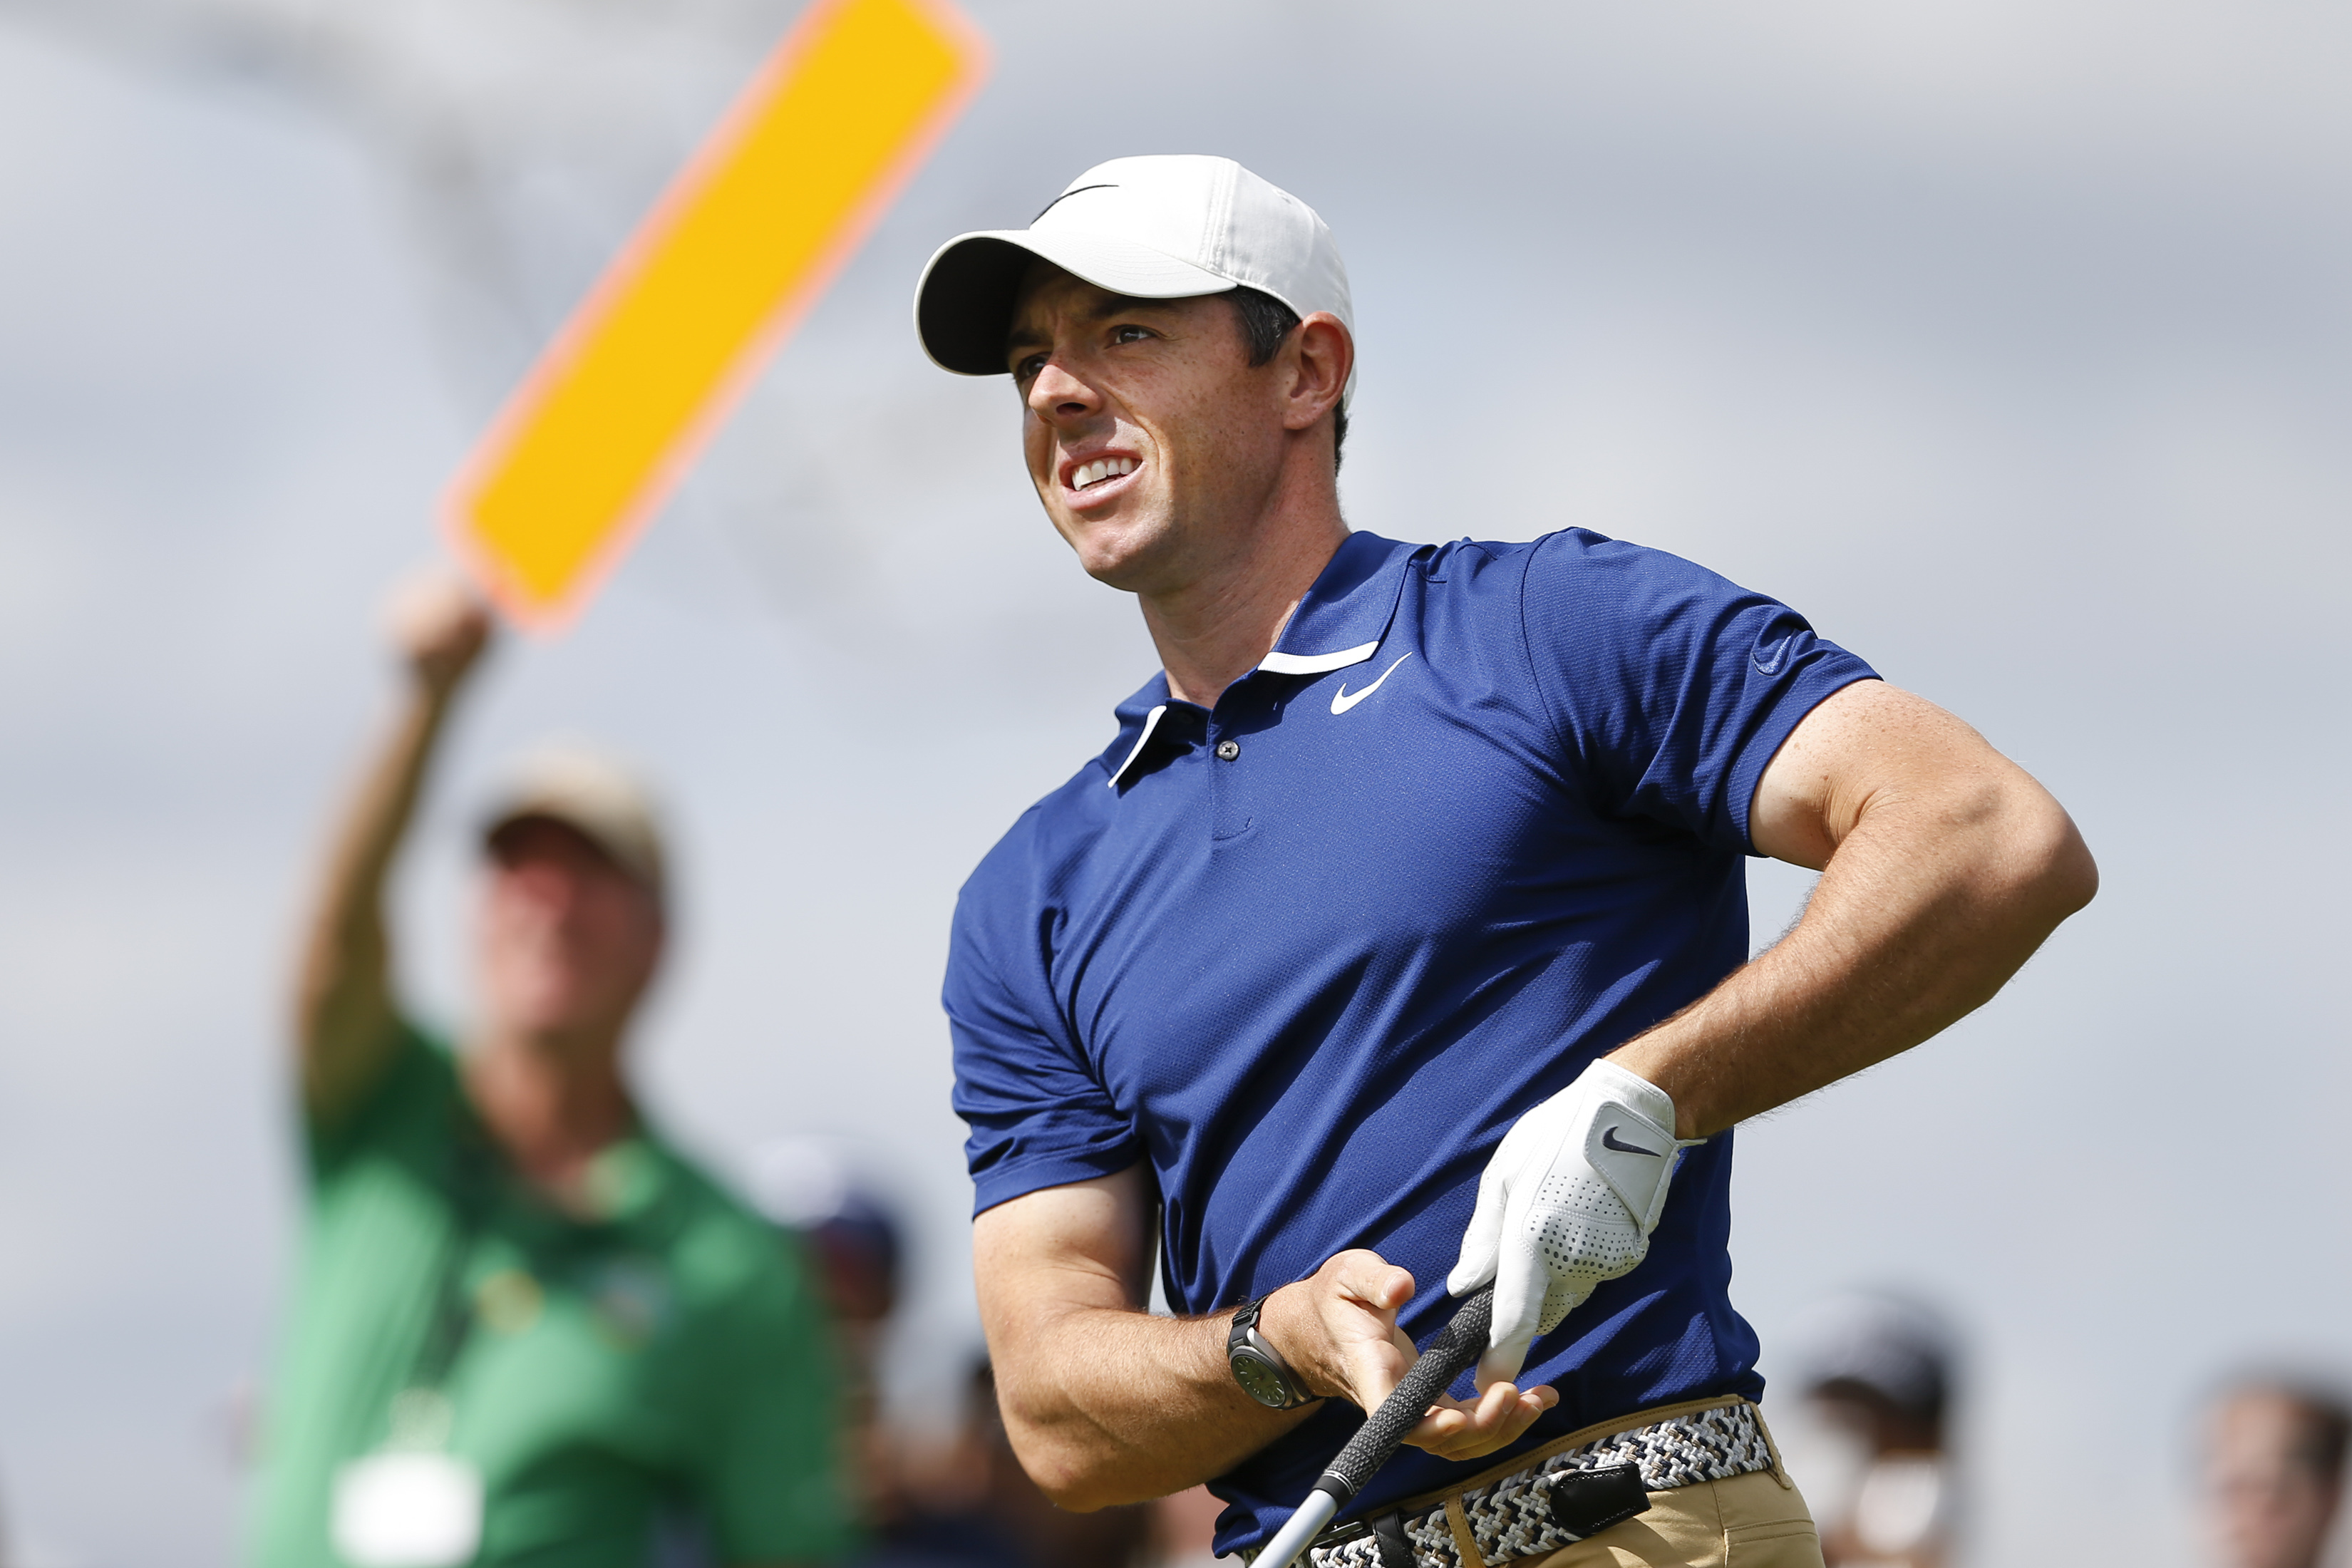 Rory McIlroy compares Pete Dye courses to like drinking beer